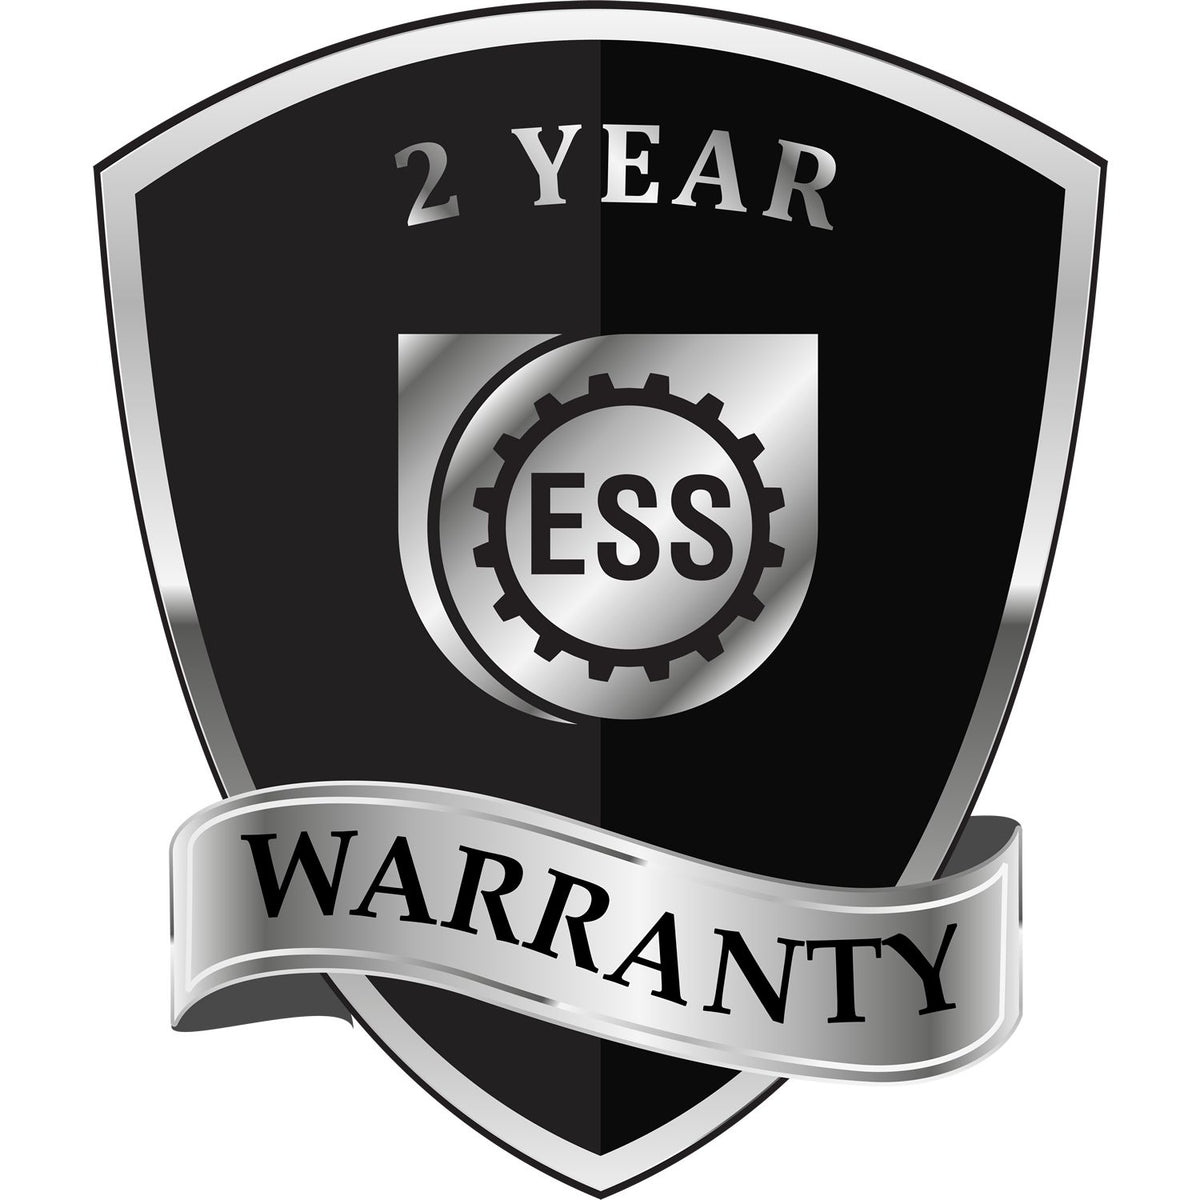 A badge or emblem showing a warranty icon for the Alaska Desk Architect Embossing Seal